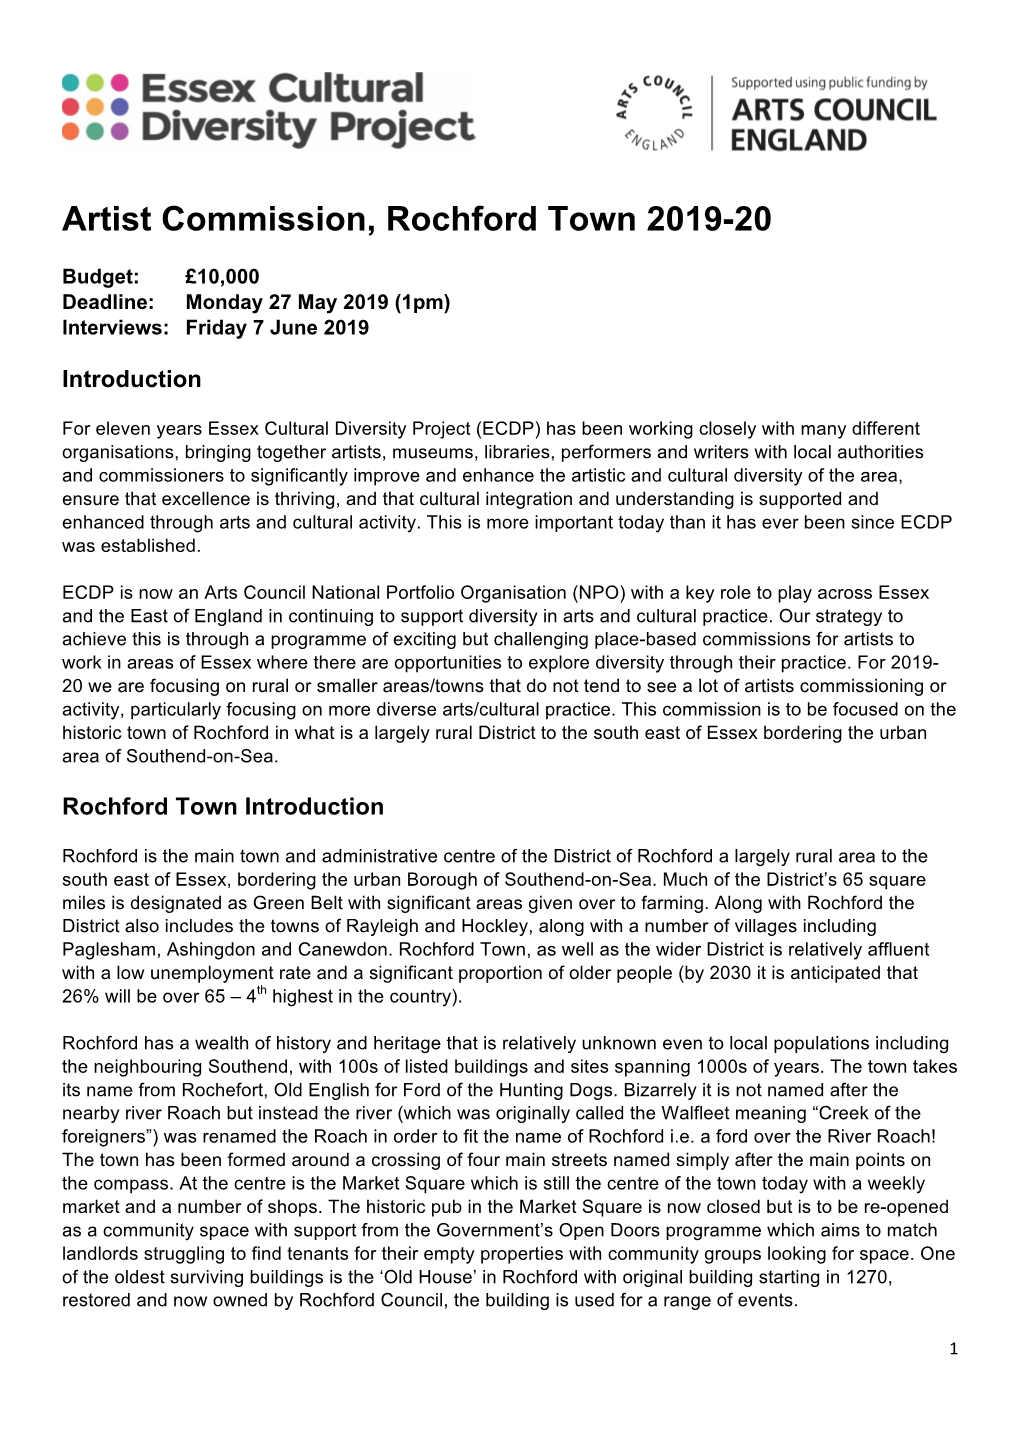 Artist Commission, Rochford Town 2019-20